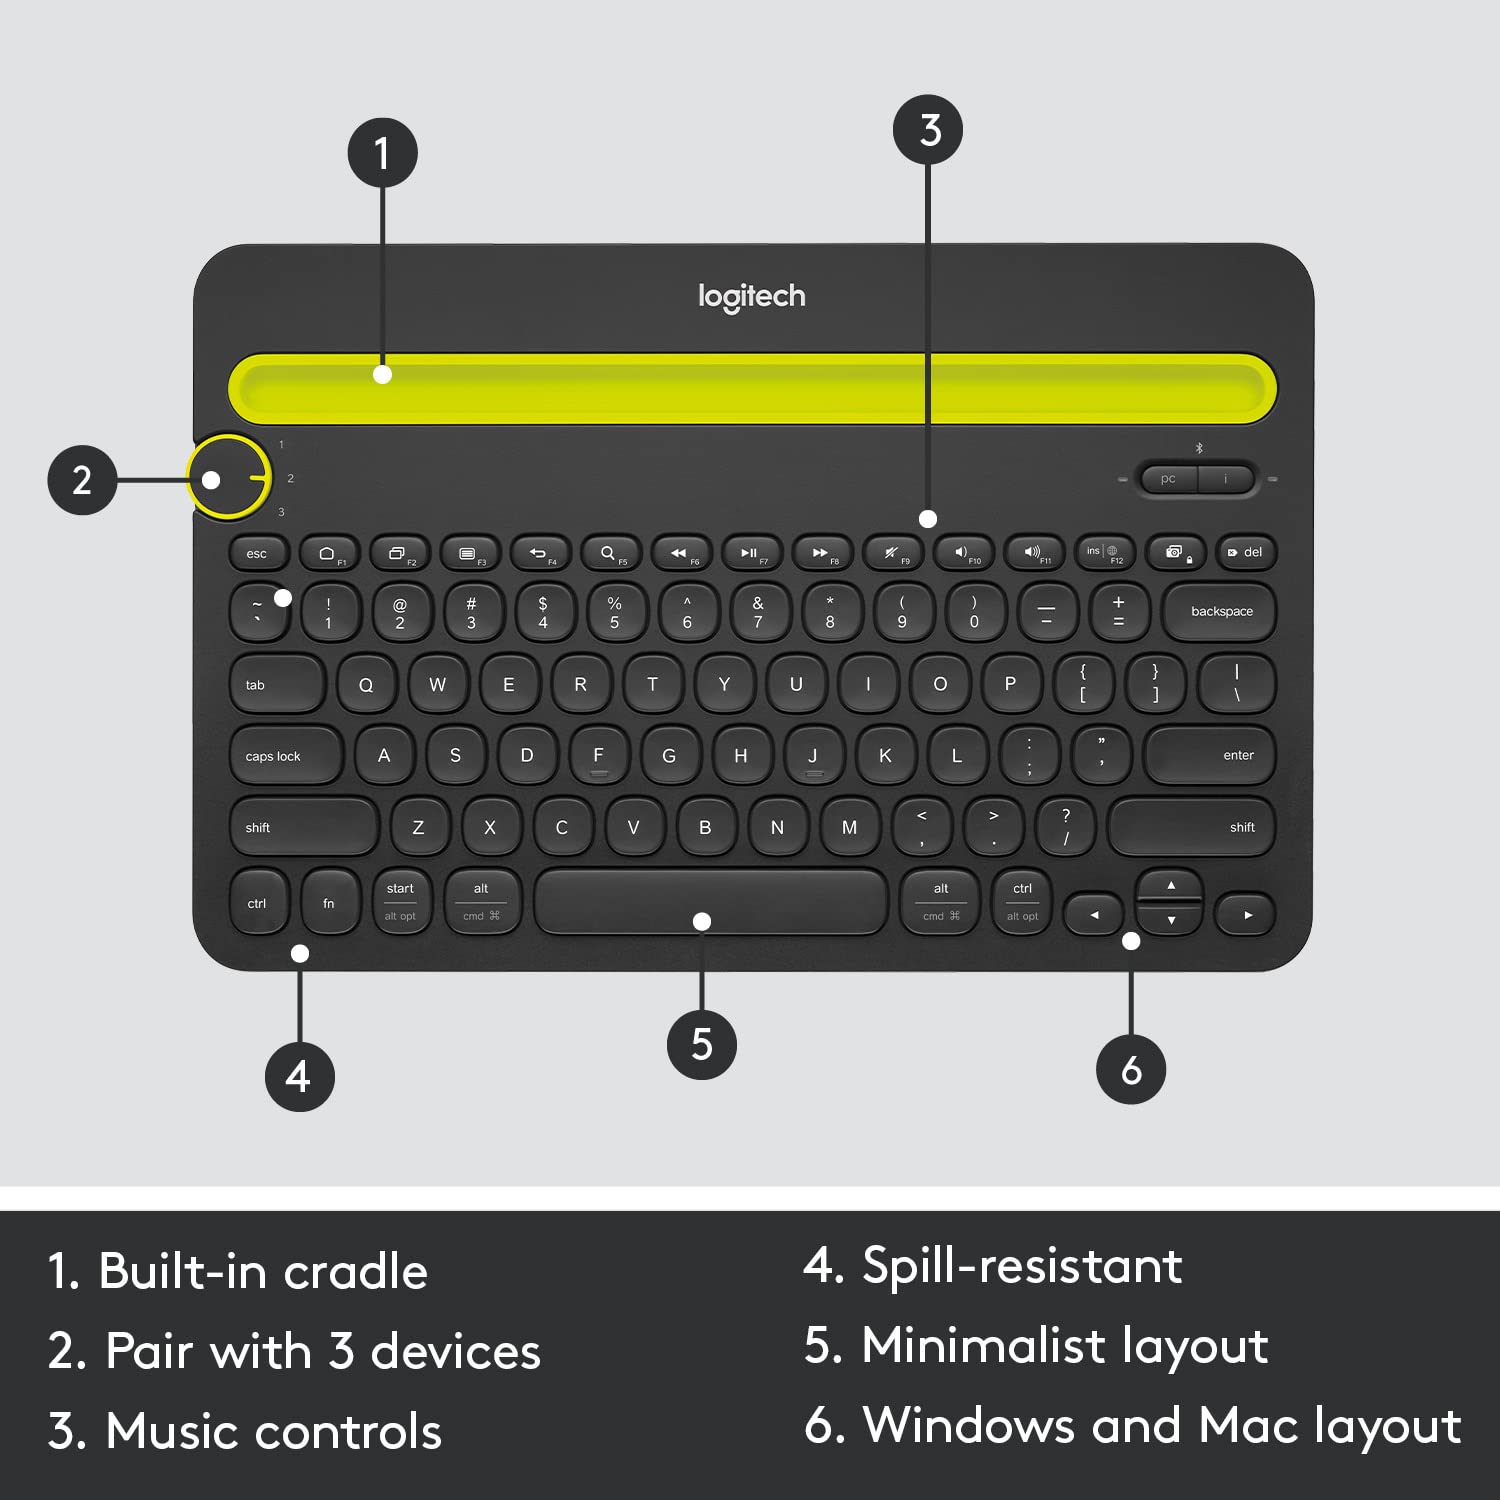 (Open Box) Logitech K480 Wireless Multi-Device Keyboard For Windows, Macos, Ipados, Android Or Chrome Os, Bluetooth, Compact, Compatible With Pc, Mac, Laptop, Smartphone, Tablet - Black (Grade - A+)